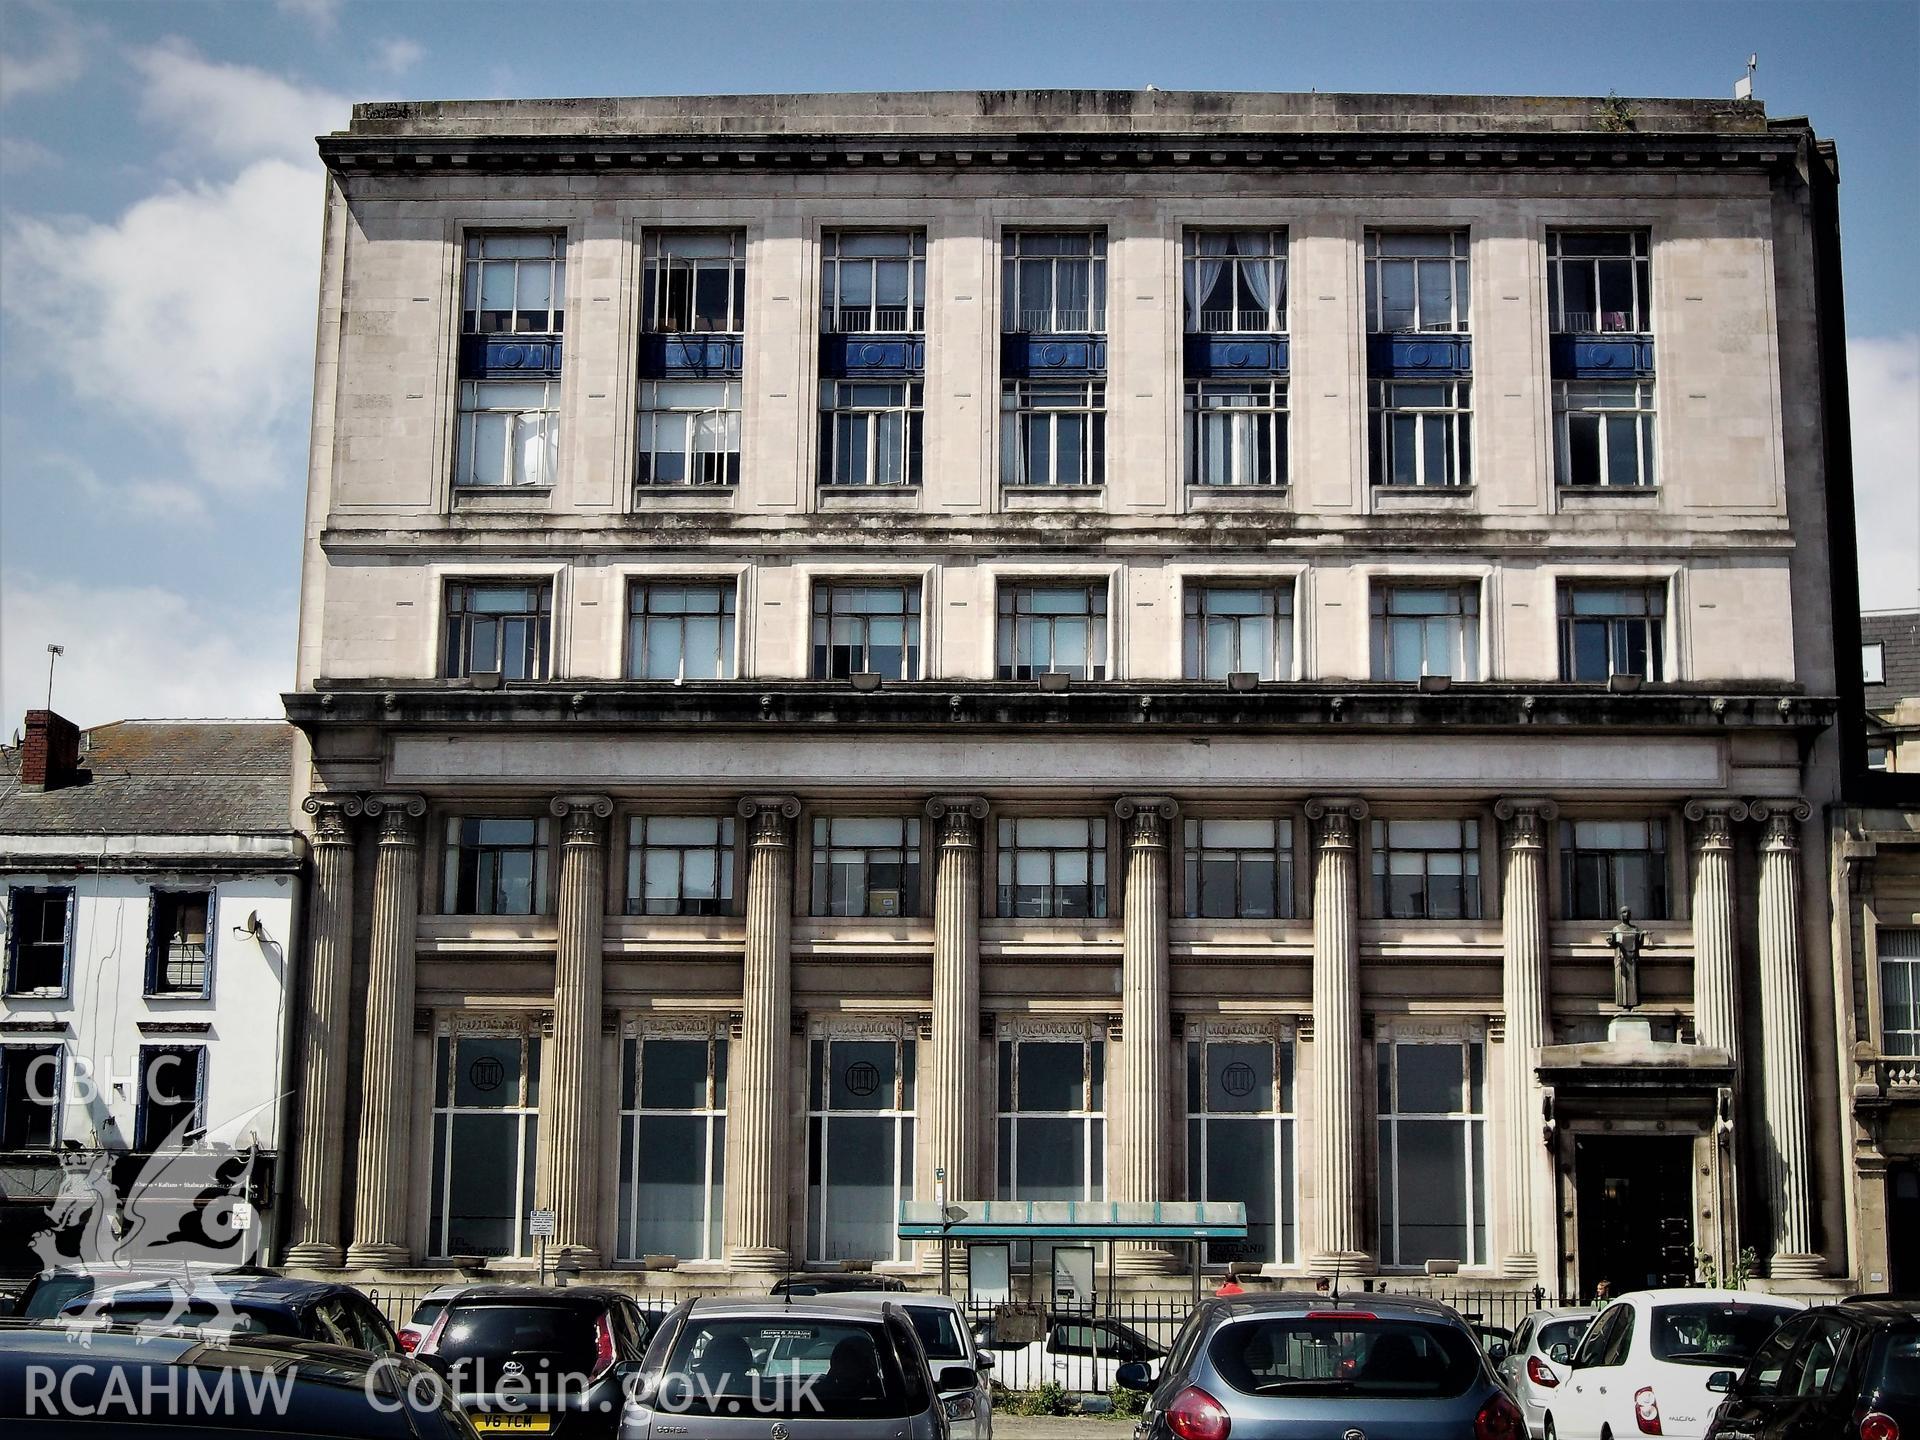 Colour photograph showing exterior of the former National Westminster bank, Bute Street, Butetown, taken by Adam Coward on 10th July 2018.